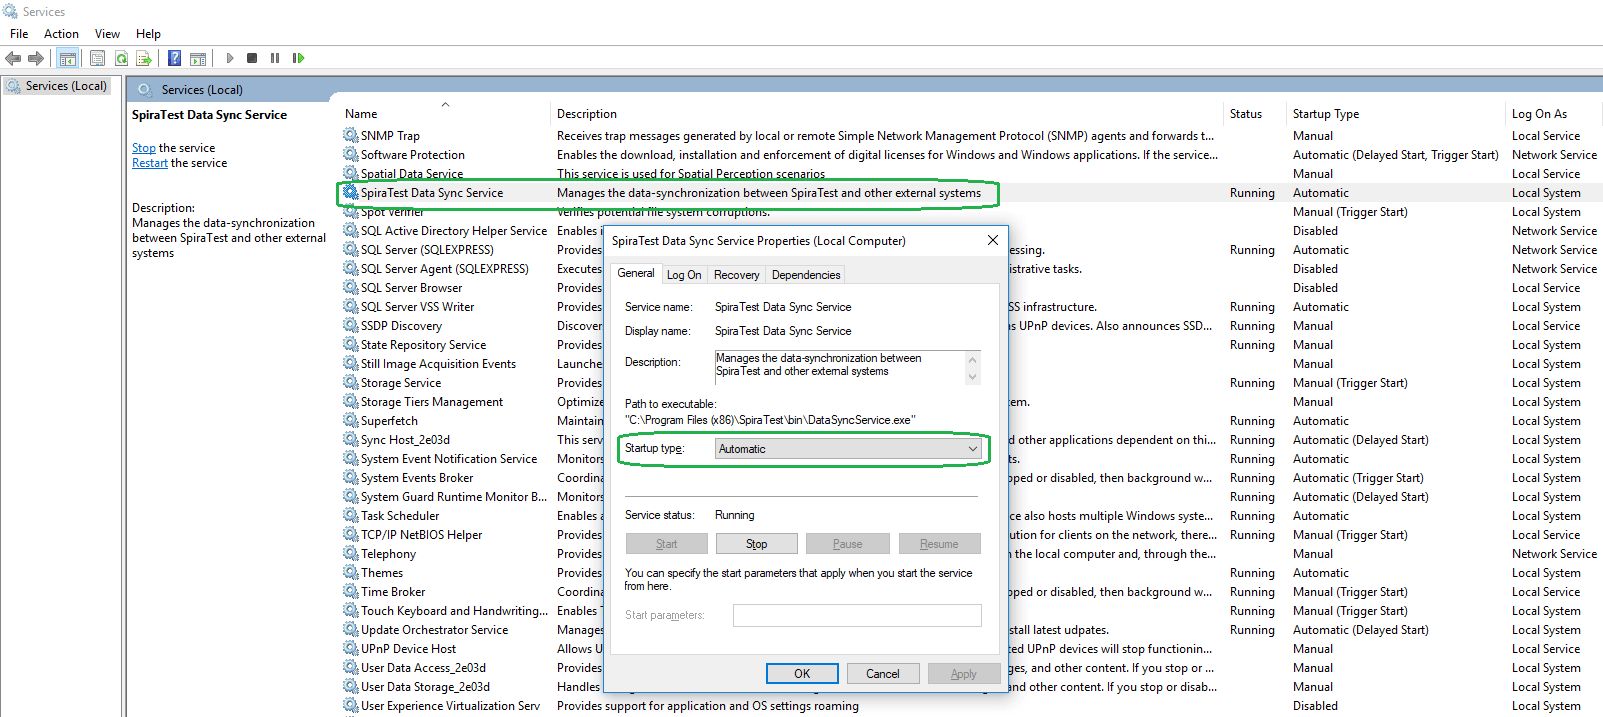  Start (and set to Automatic) SpiraTest Data Sync Service from the Windows Services. Right click on the service, select Properties and set it to Automatic.